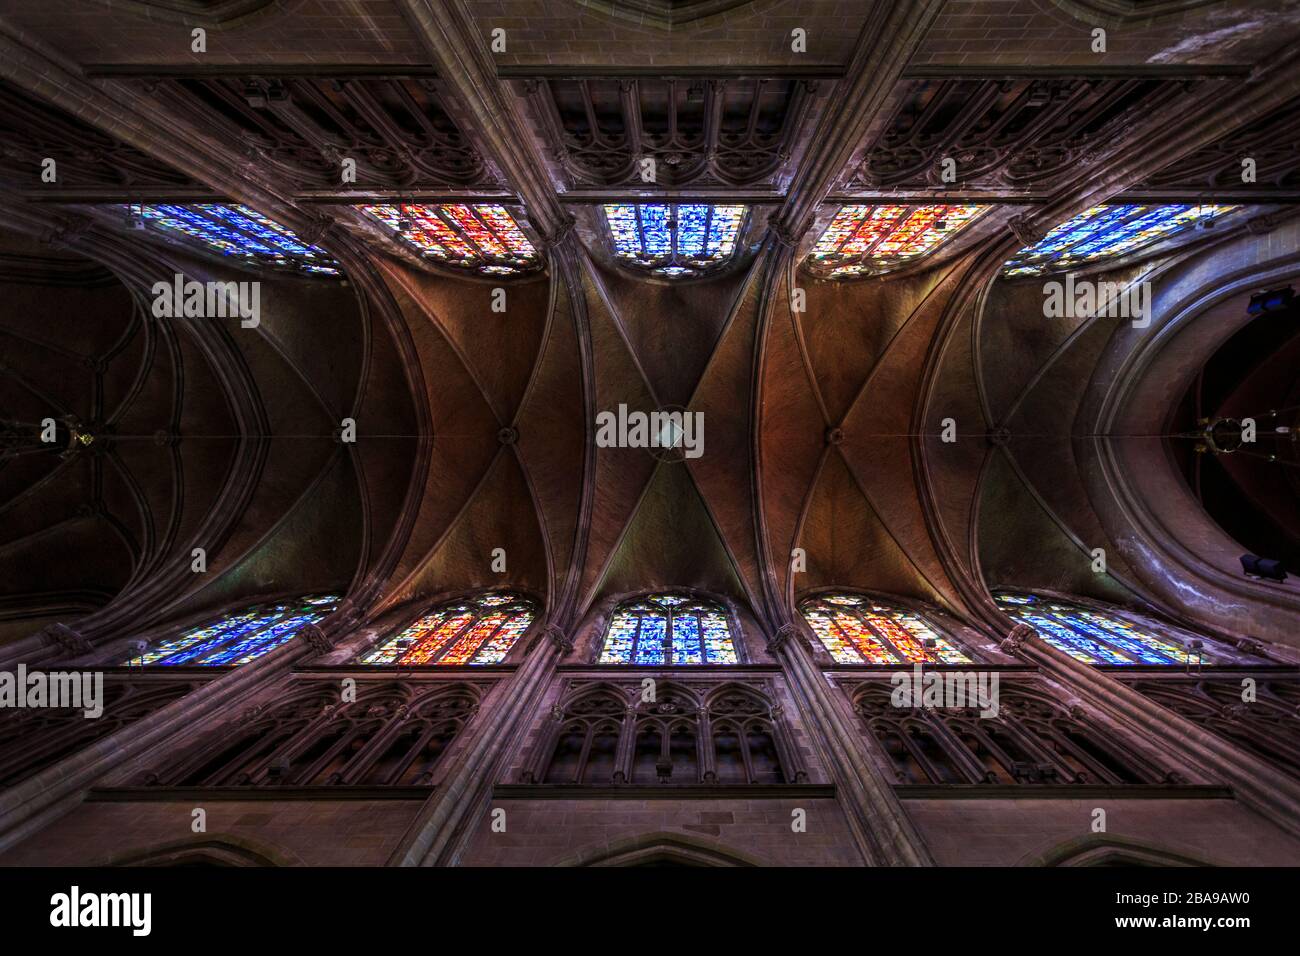 Wide picture from the ceiling of the Church of Saint Peter and Saint Paul, with colored stained glass. Stock Photo